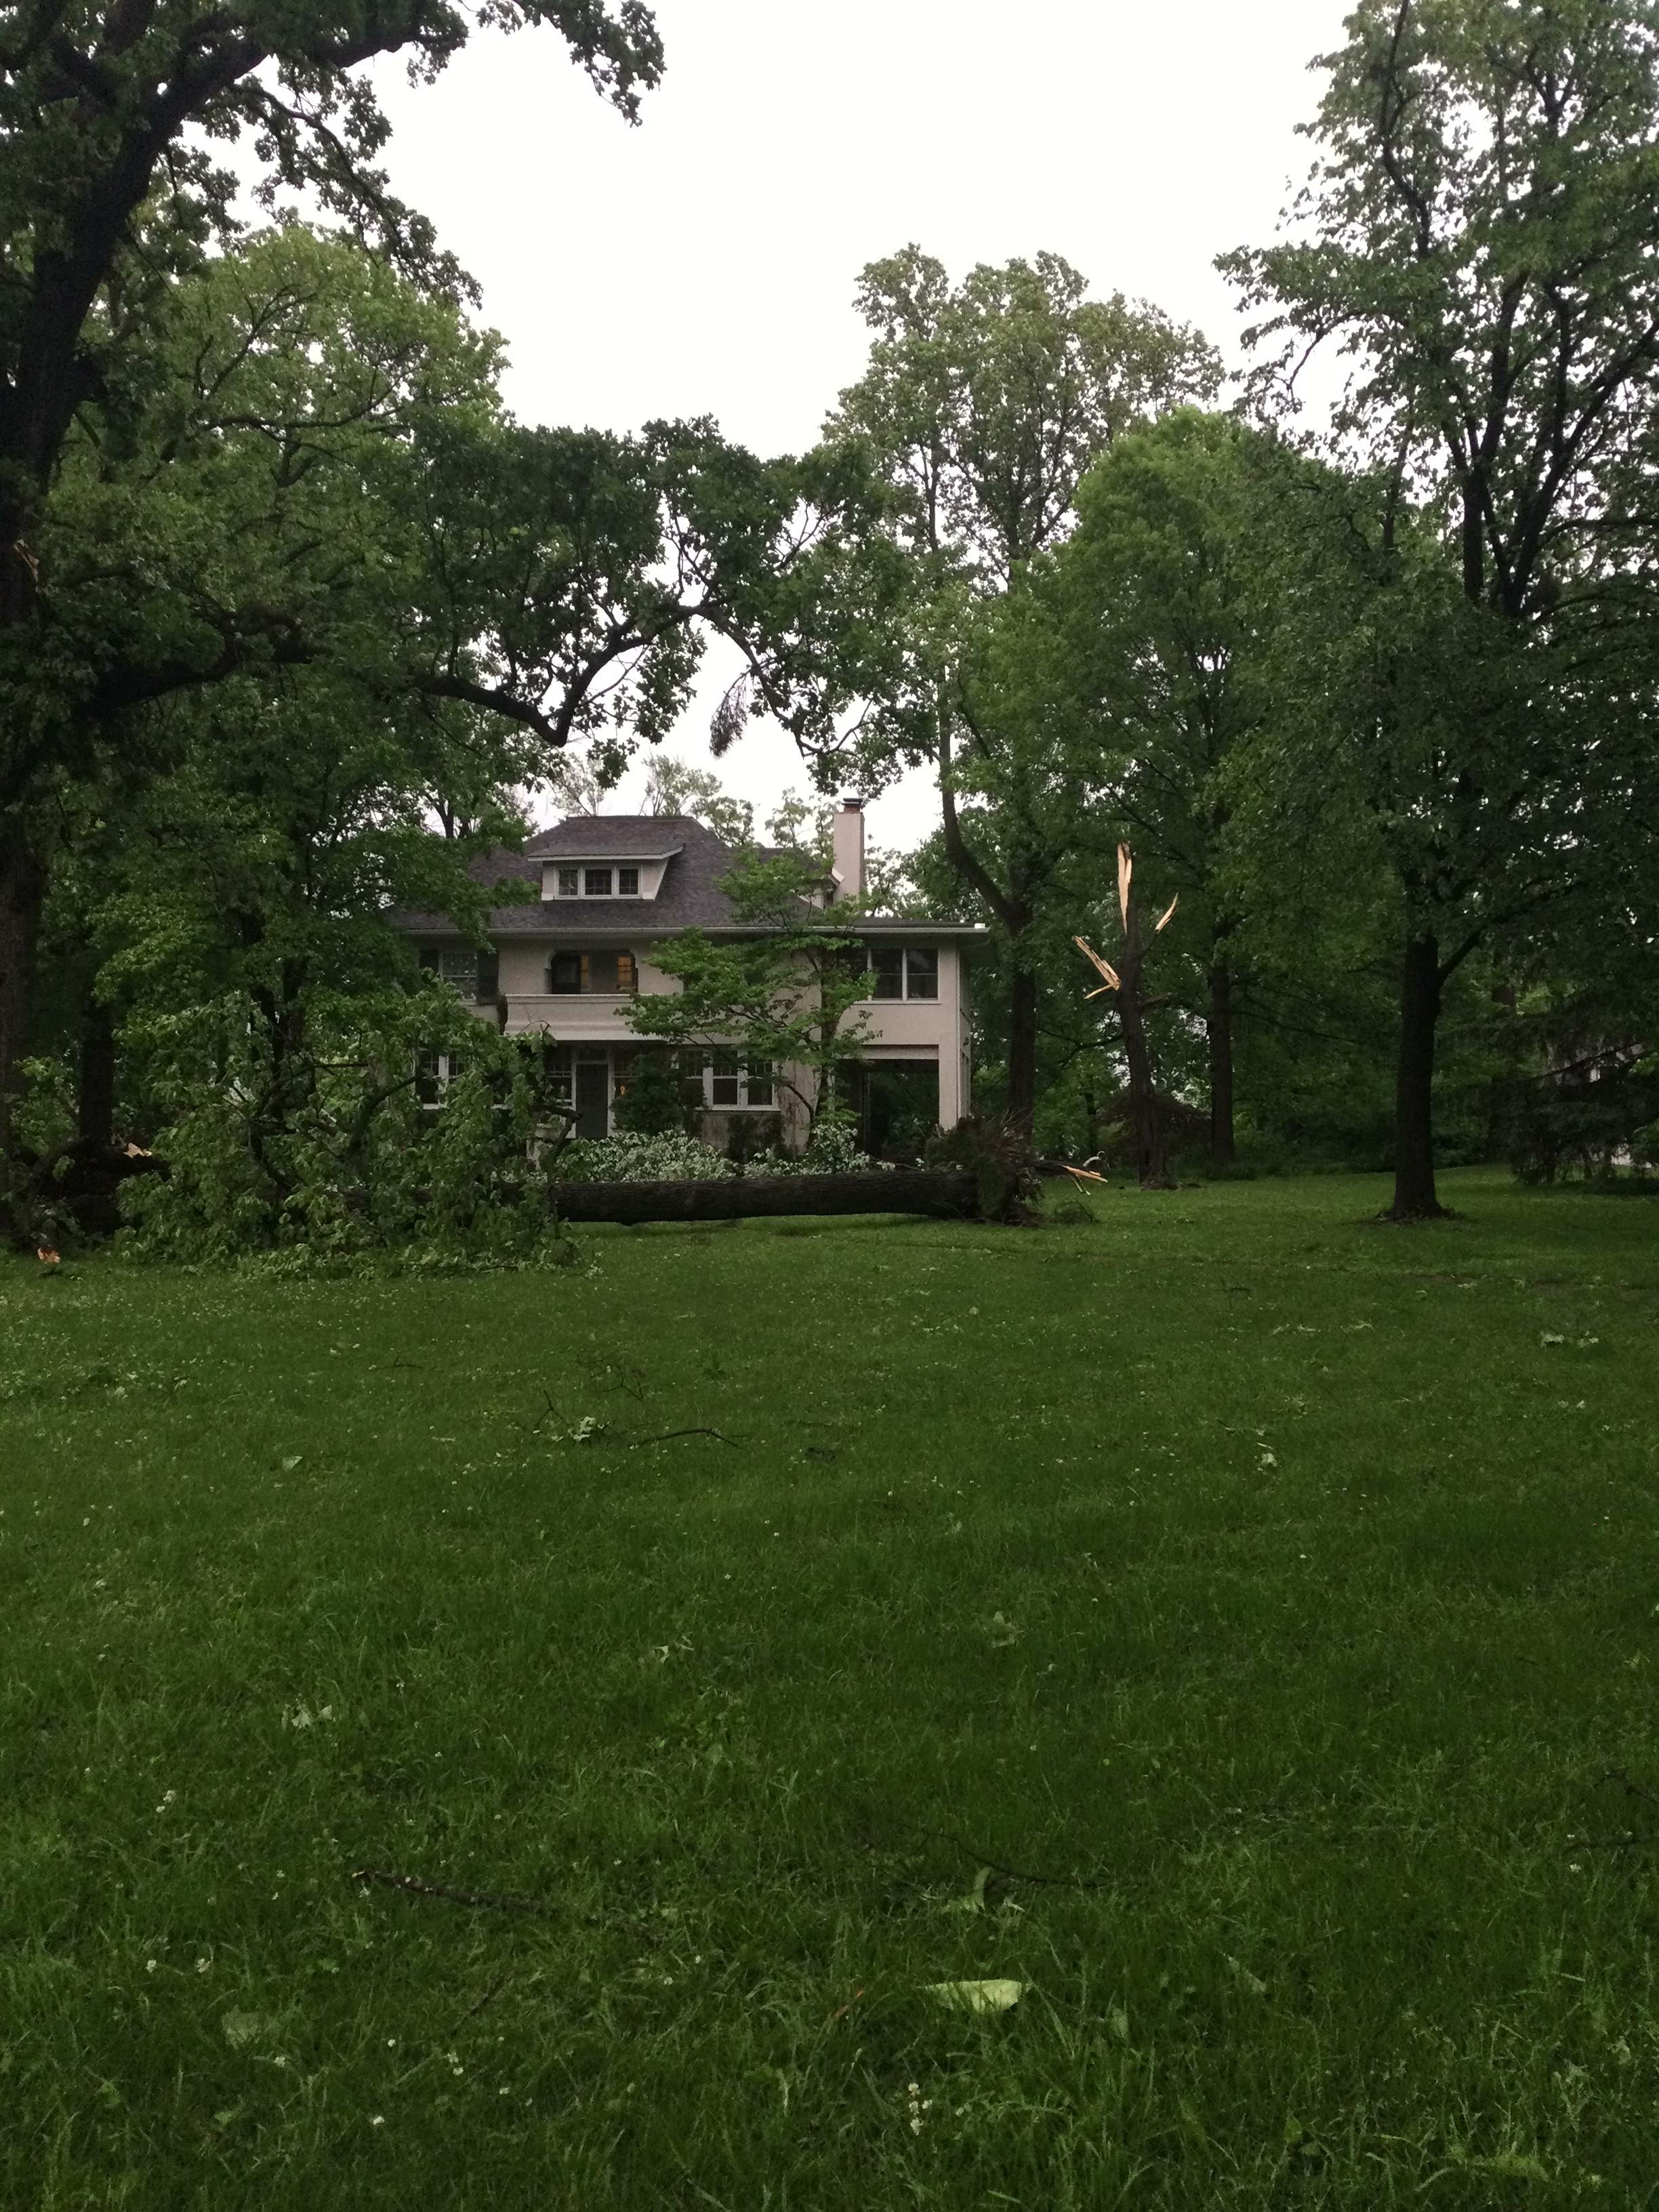 An uprooted tree in front of a house in Kirkwood, MO where a tornado struck.